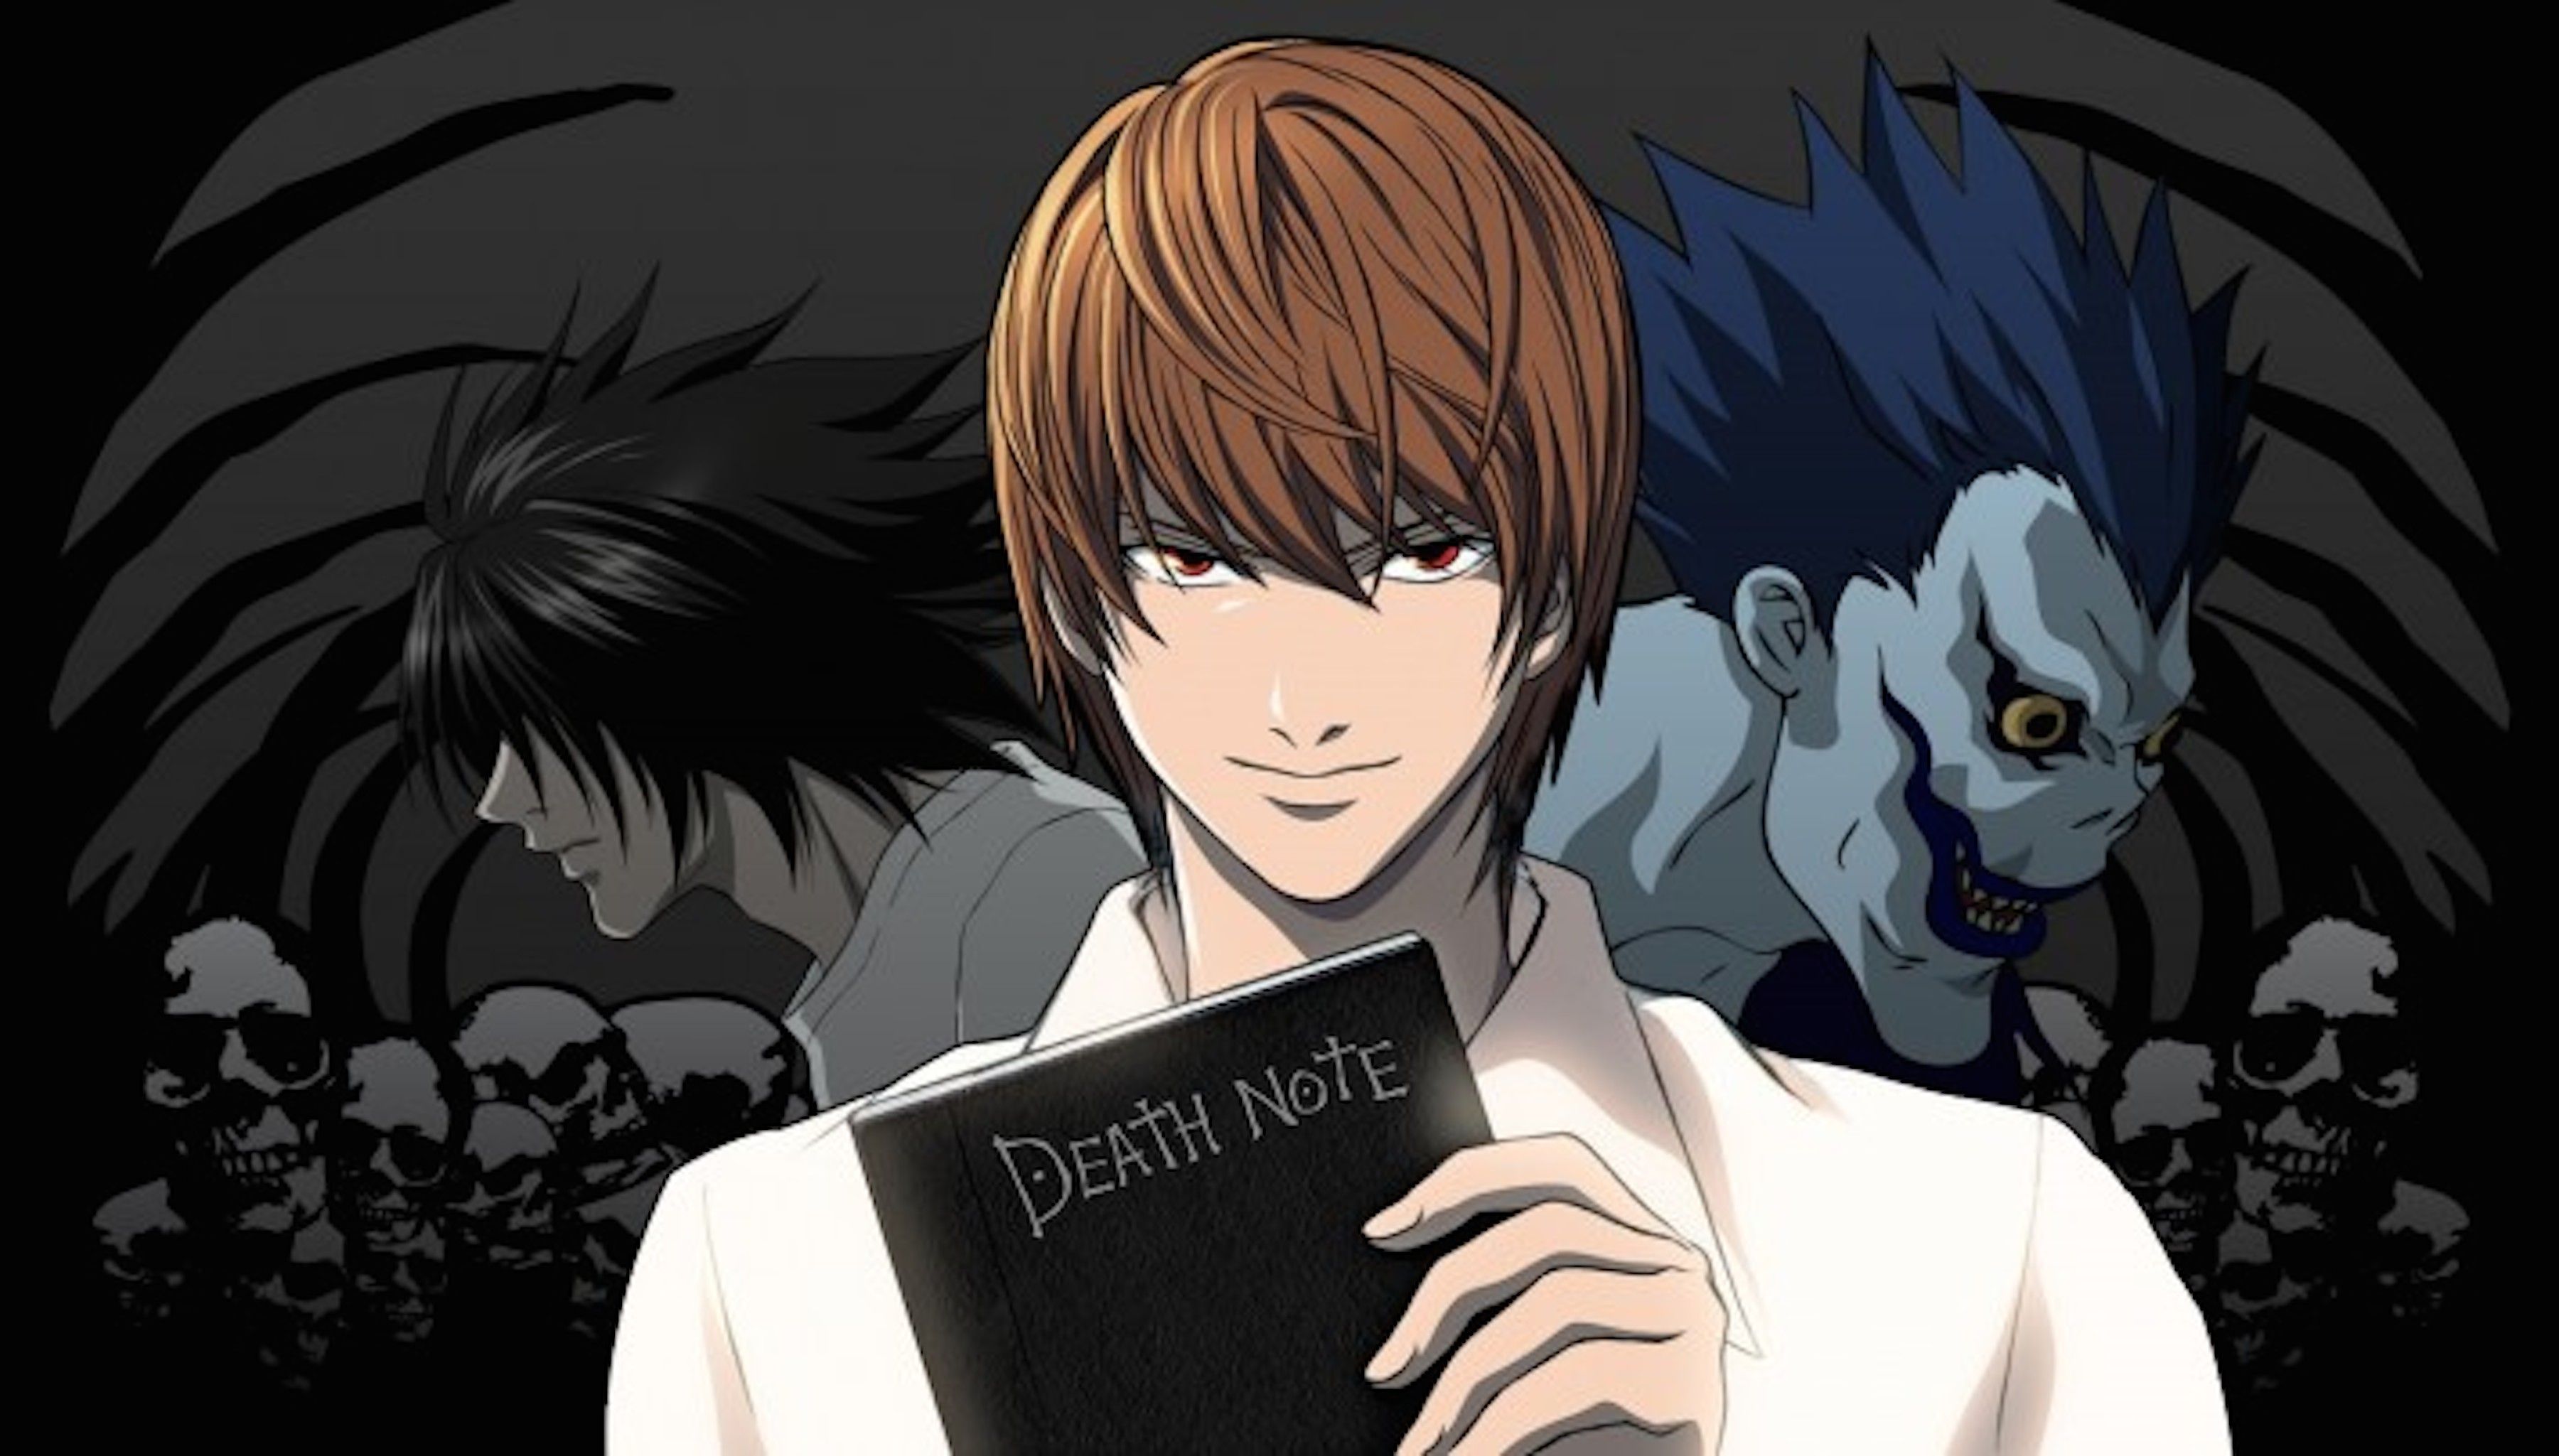 Death Note Wallpapers On Wallpaperdog Find and download death note desktop backgrounds on hipwallpaper. death note wallpapers on wallpaperdog